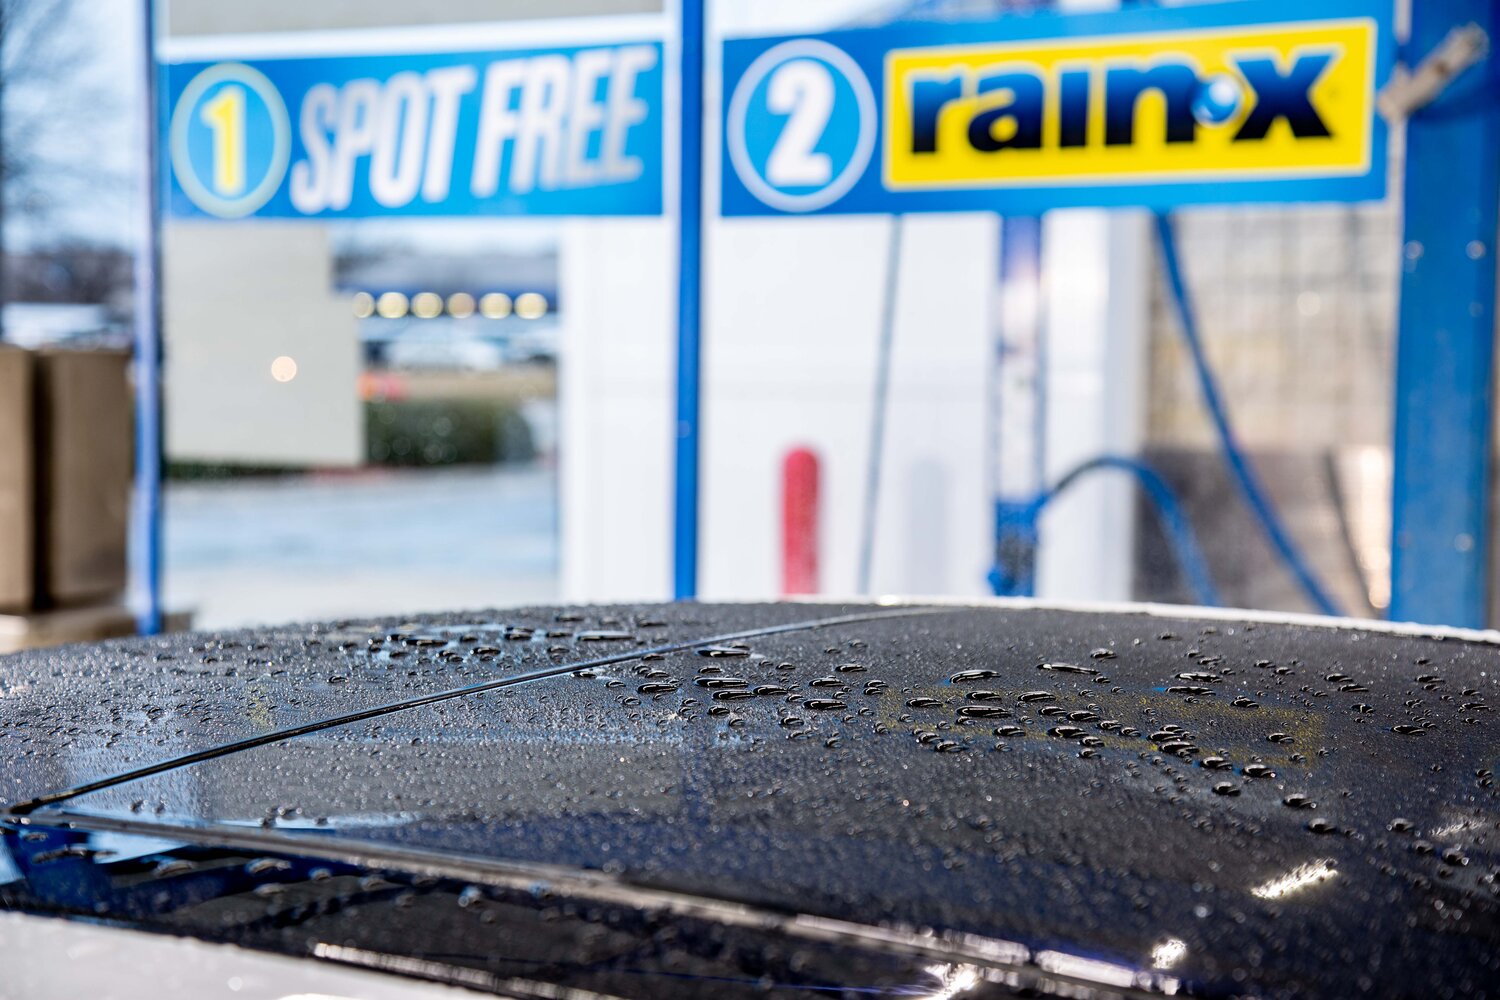 Everything You Need to Know About Rain•X Complete Surface Protectant